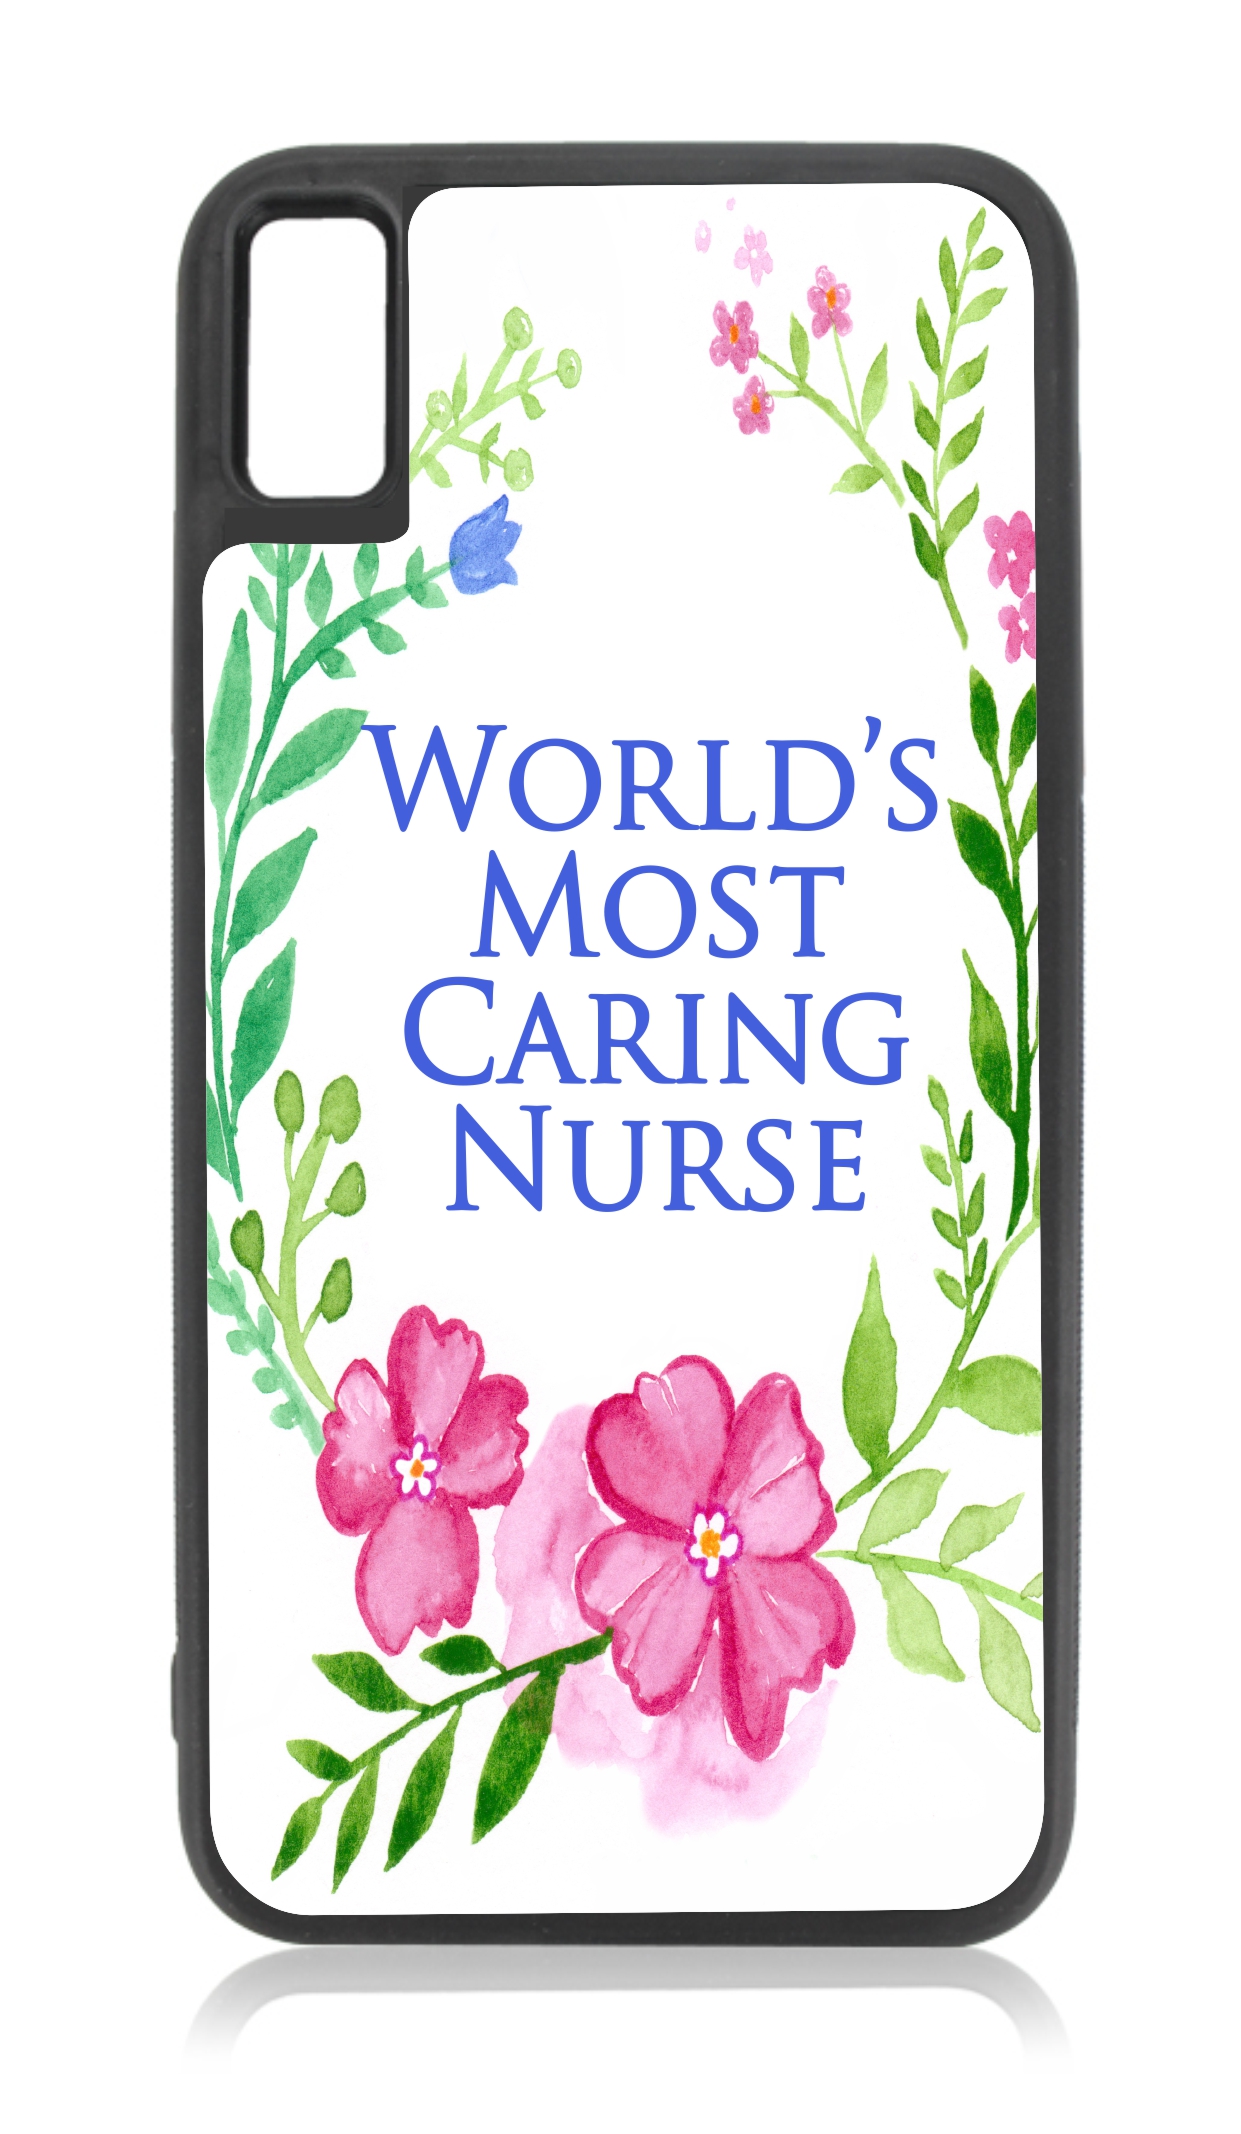 World's Most Caring Nurse Gift Appreciation Quote - XR Nurse Case Black Rubber Case for iPhone XR - iPhone XR Phone Case - iPhone XR Accessories - image 1 of 1